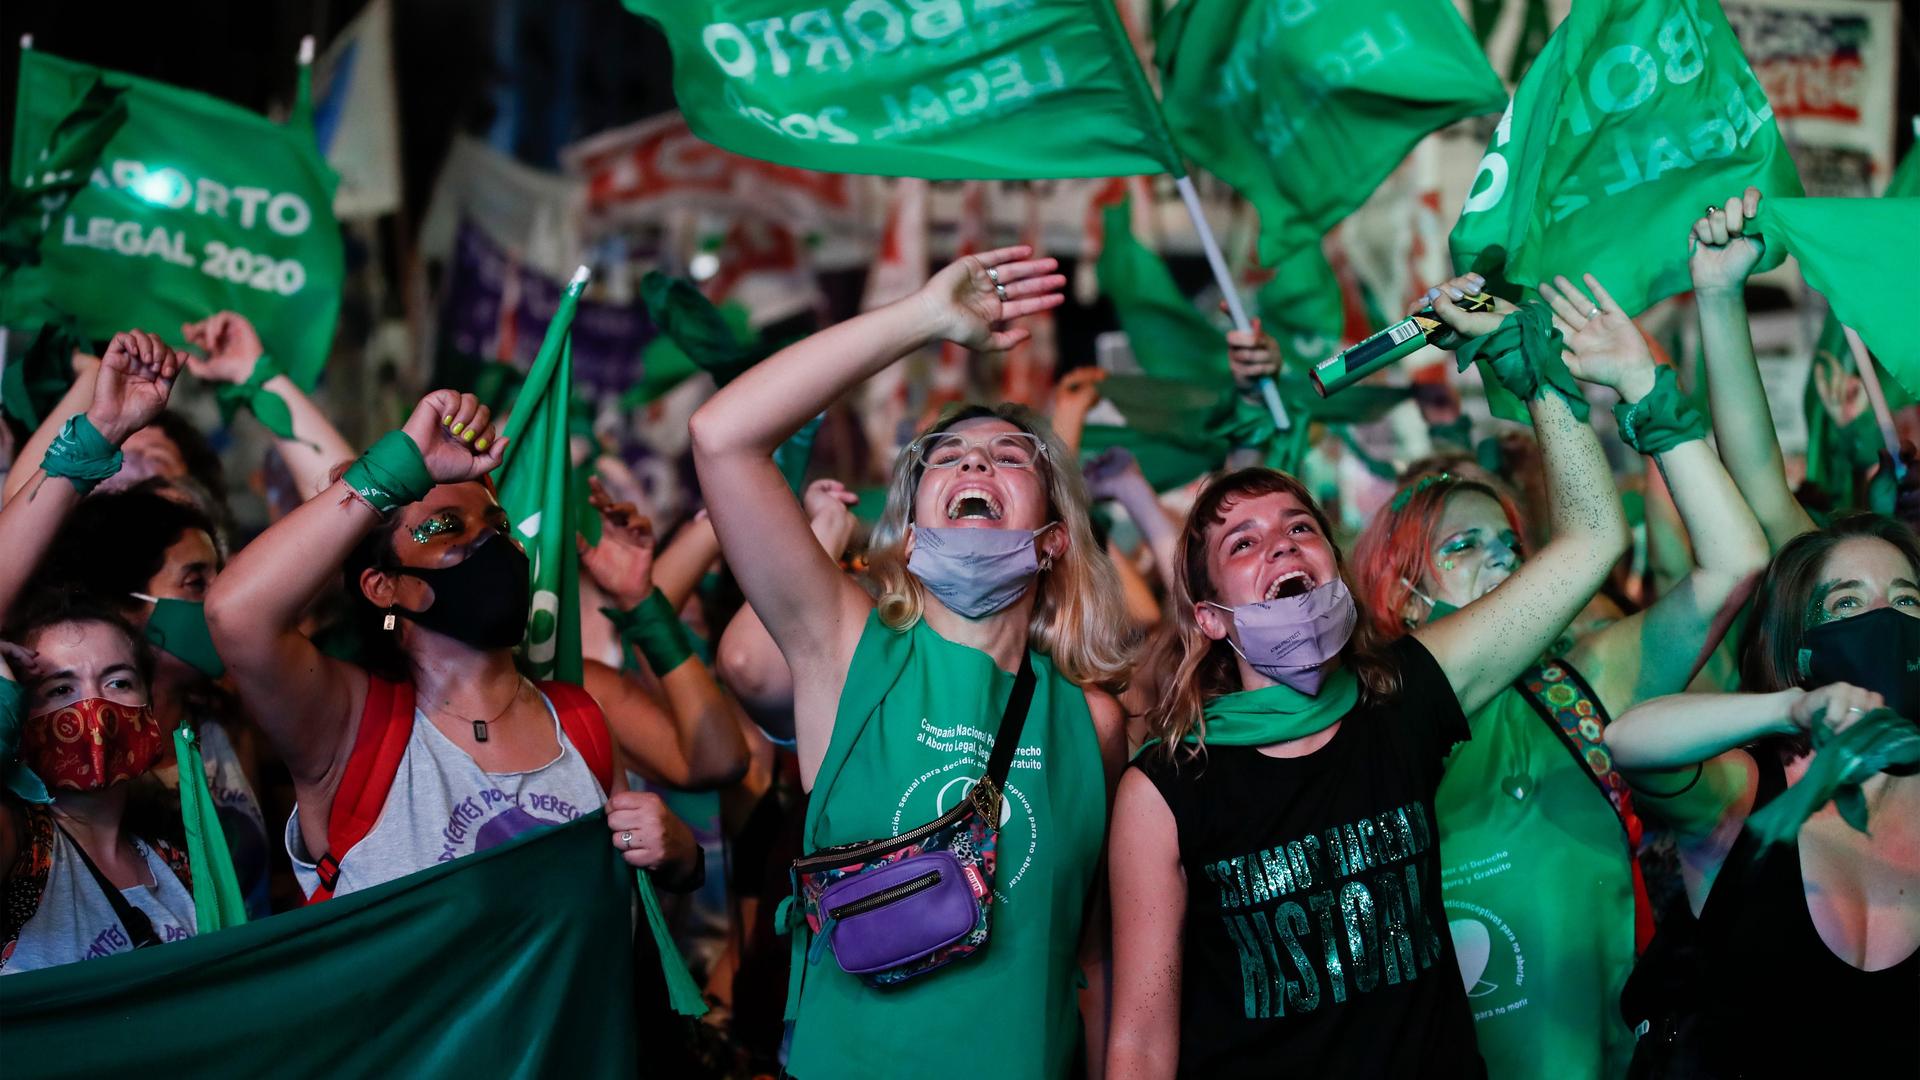 A group of women raise their arms and wave green flags